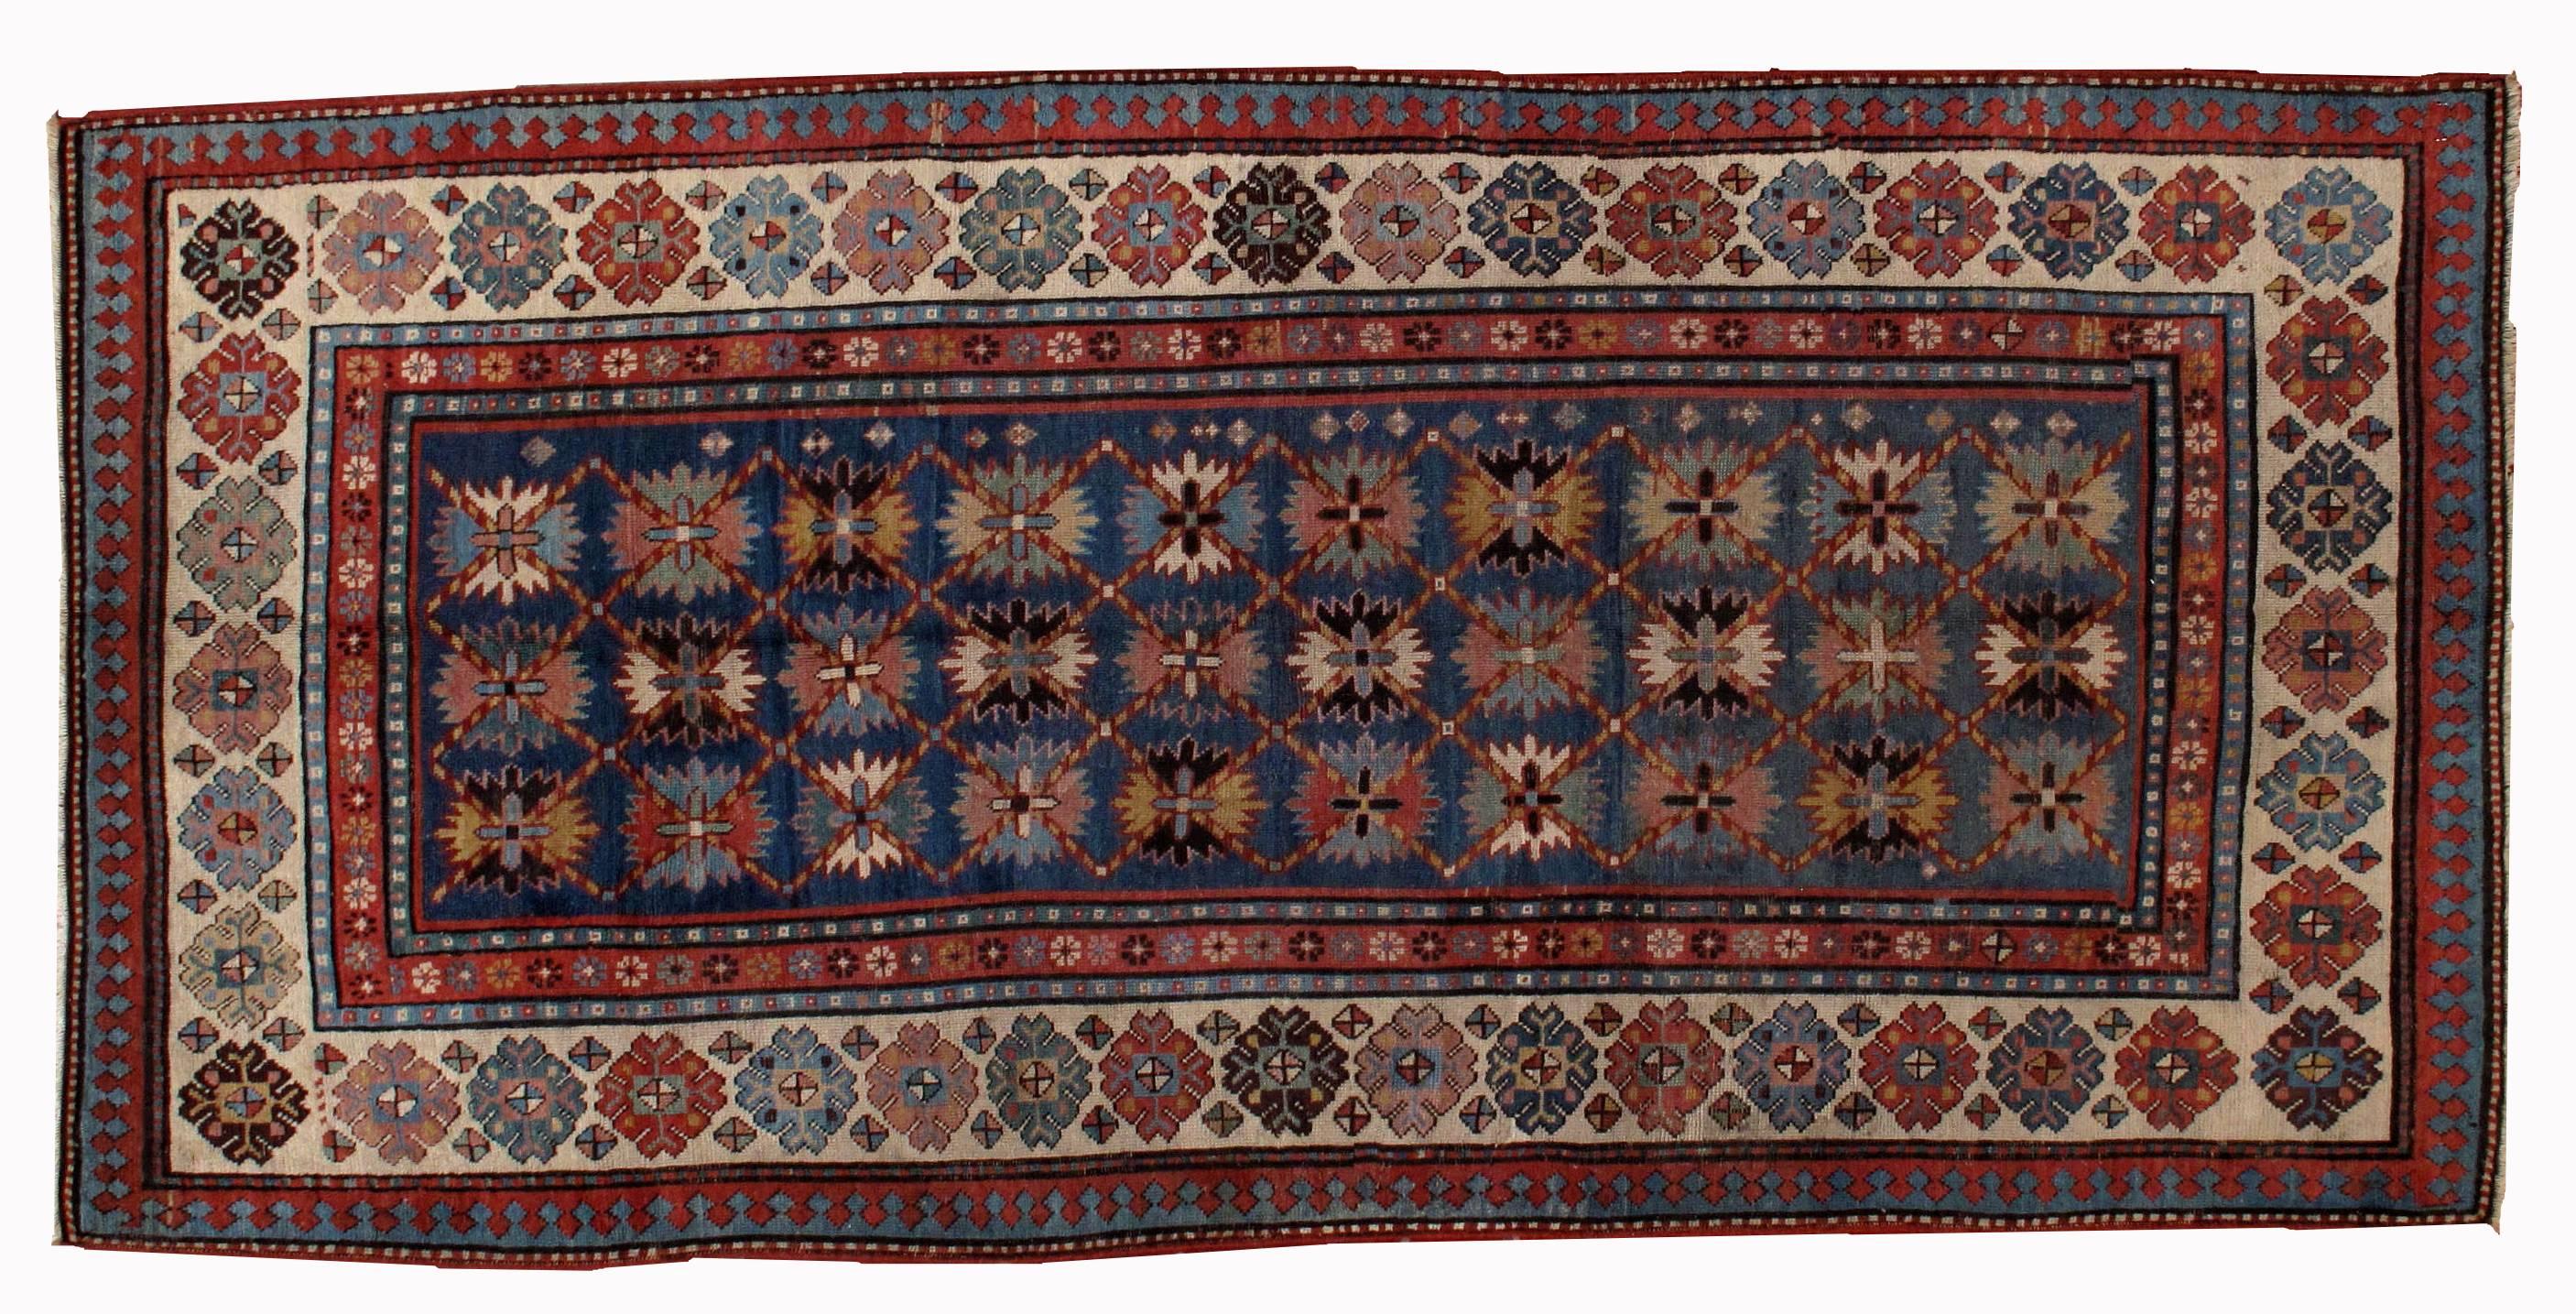 Antique handmade Caucasian Talish rug in good condition. The rug is in navy blue shade for the background with nice white border. It has nice floral design. The condition is good, it has been restored.
 